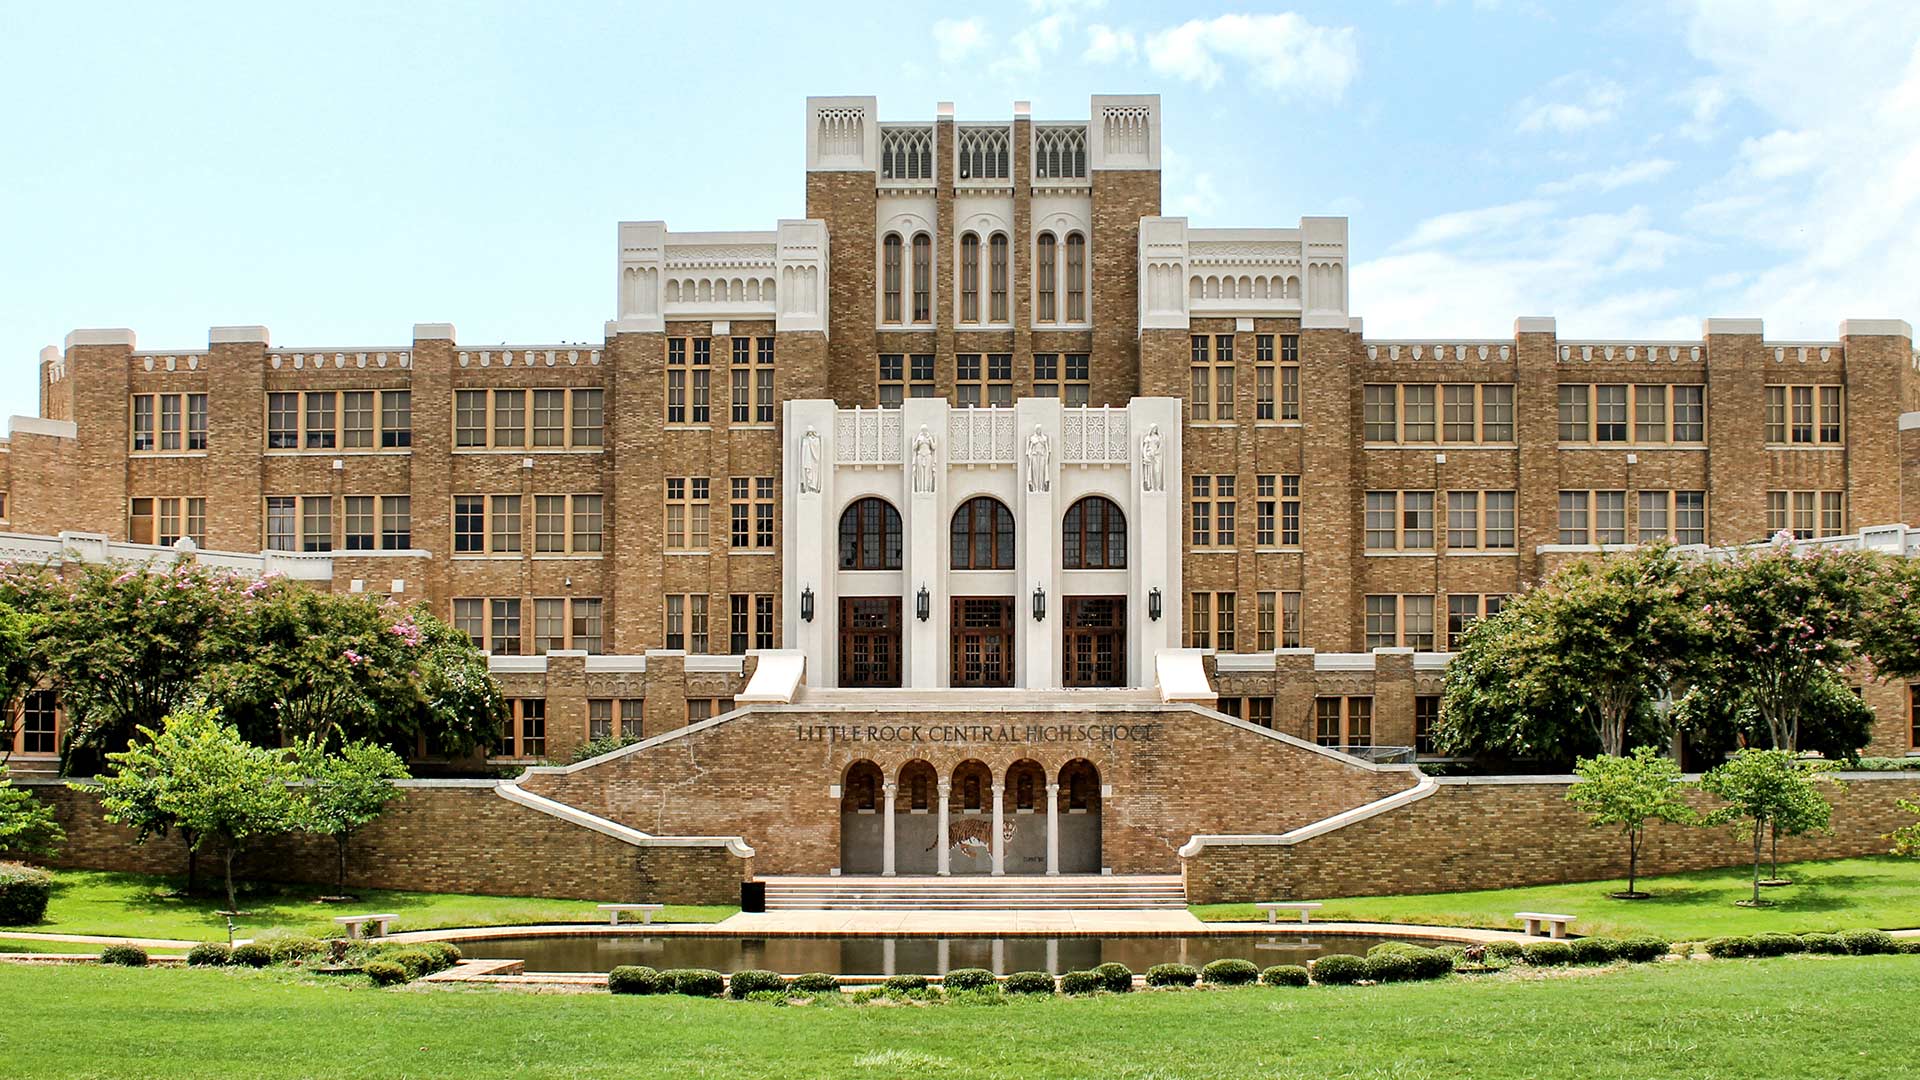 View of Little Rock Central High School